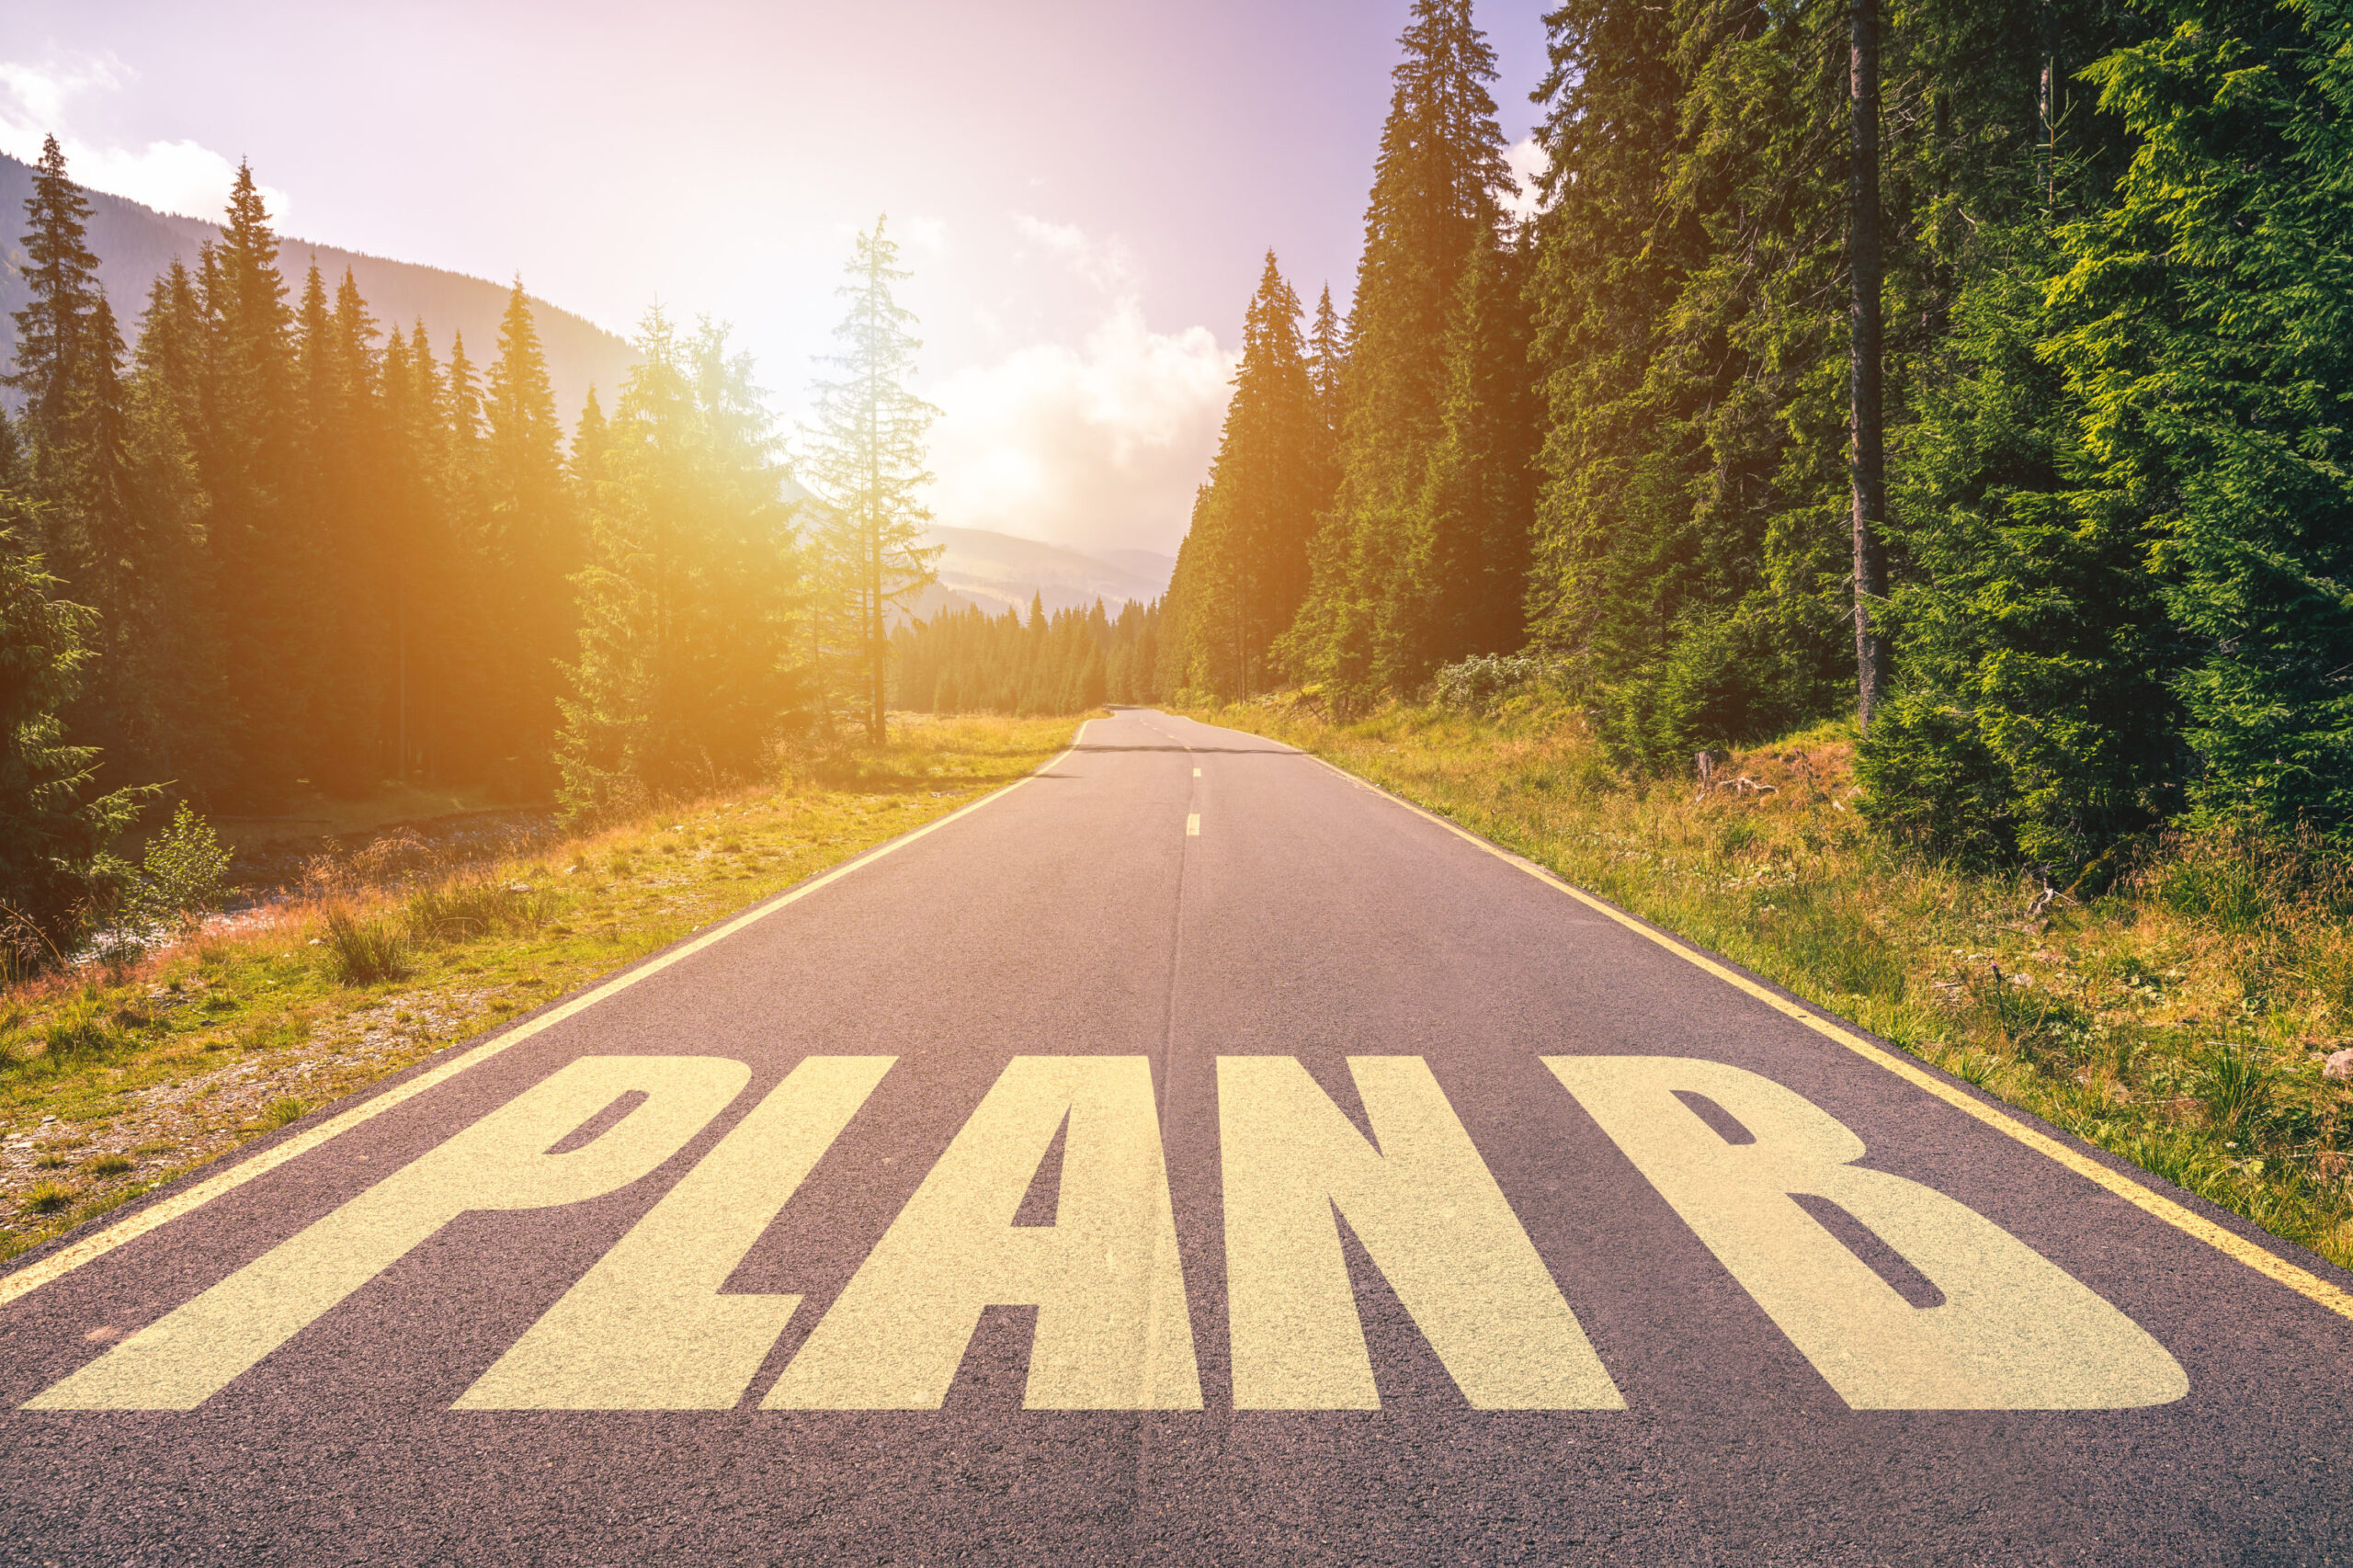 As a small business owner, do I need a Plan B for retirement? (Video)